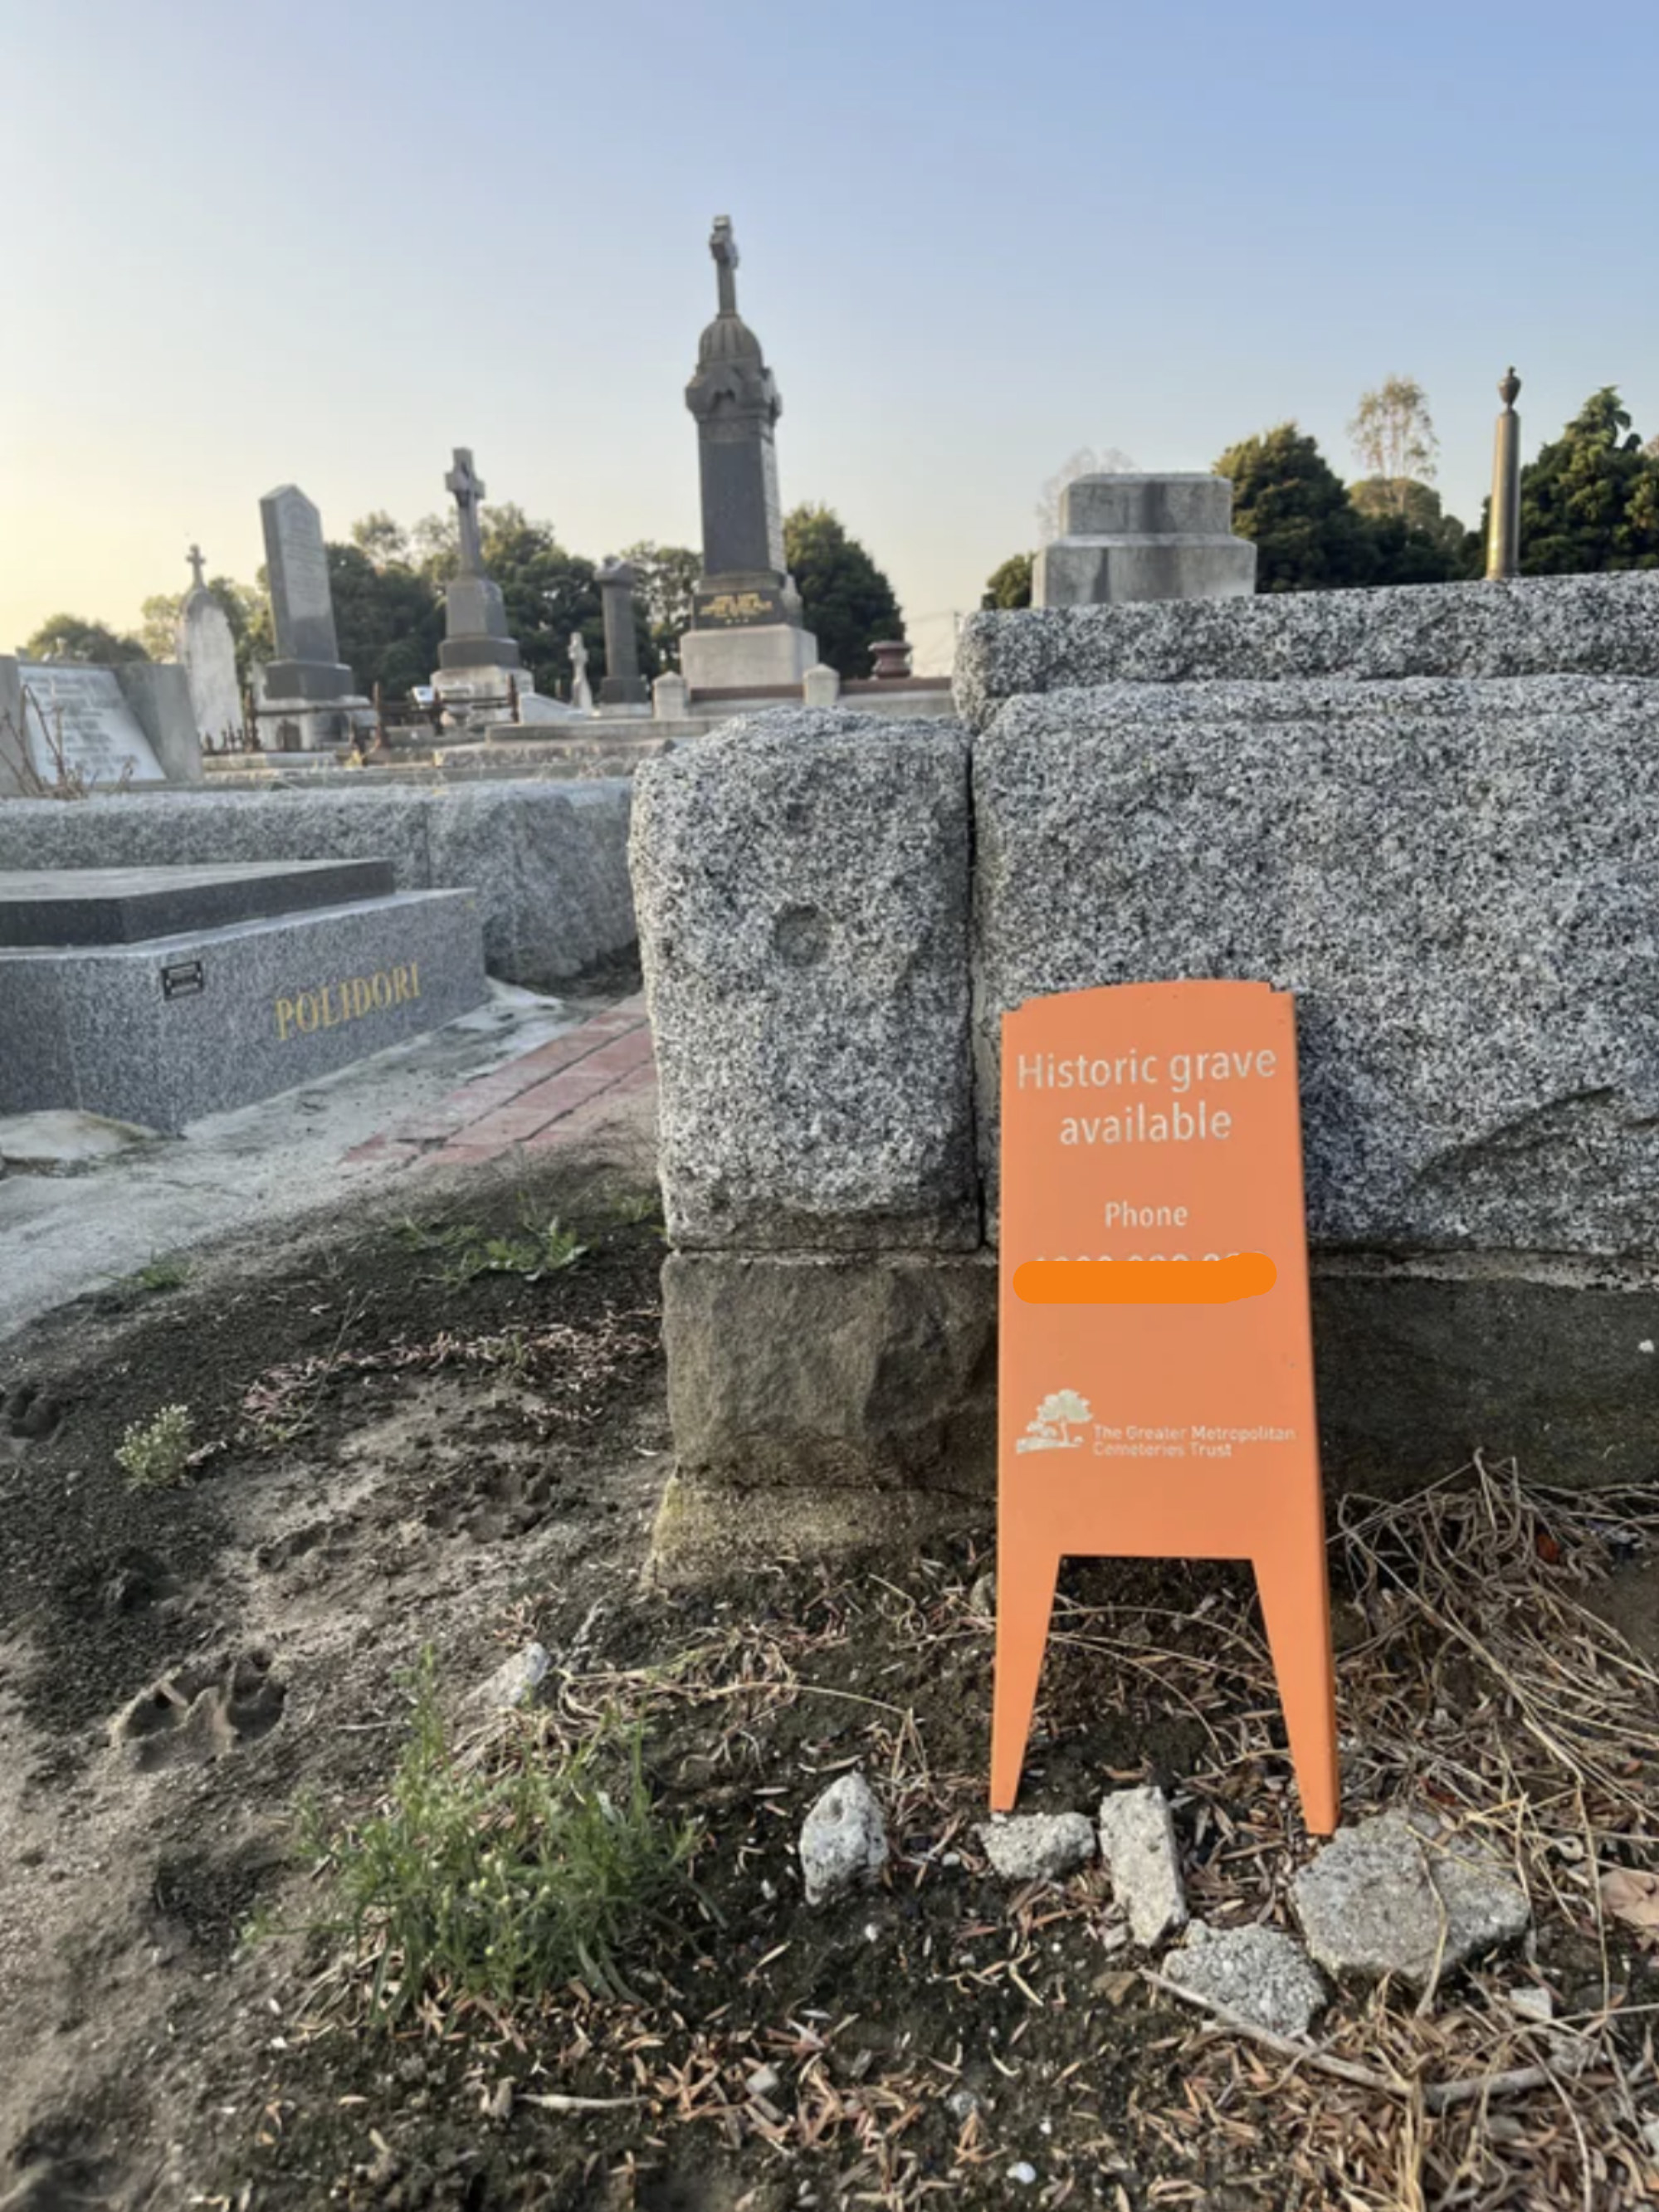 historic grave available